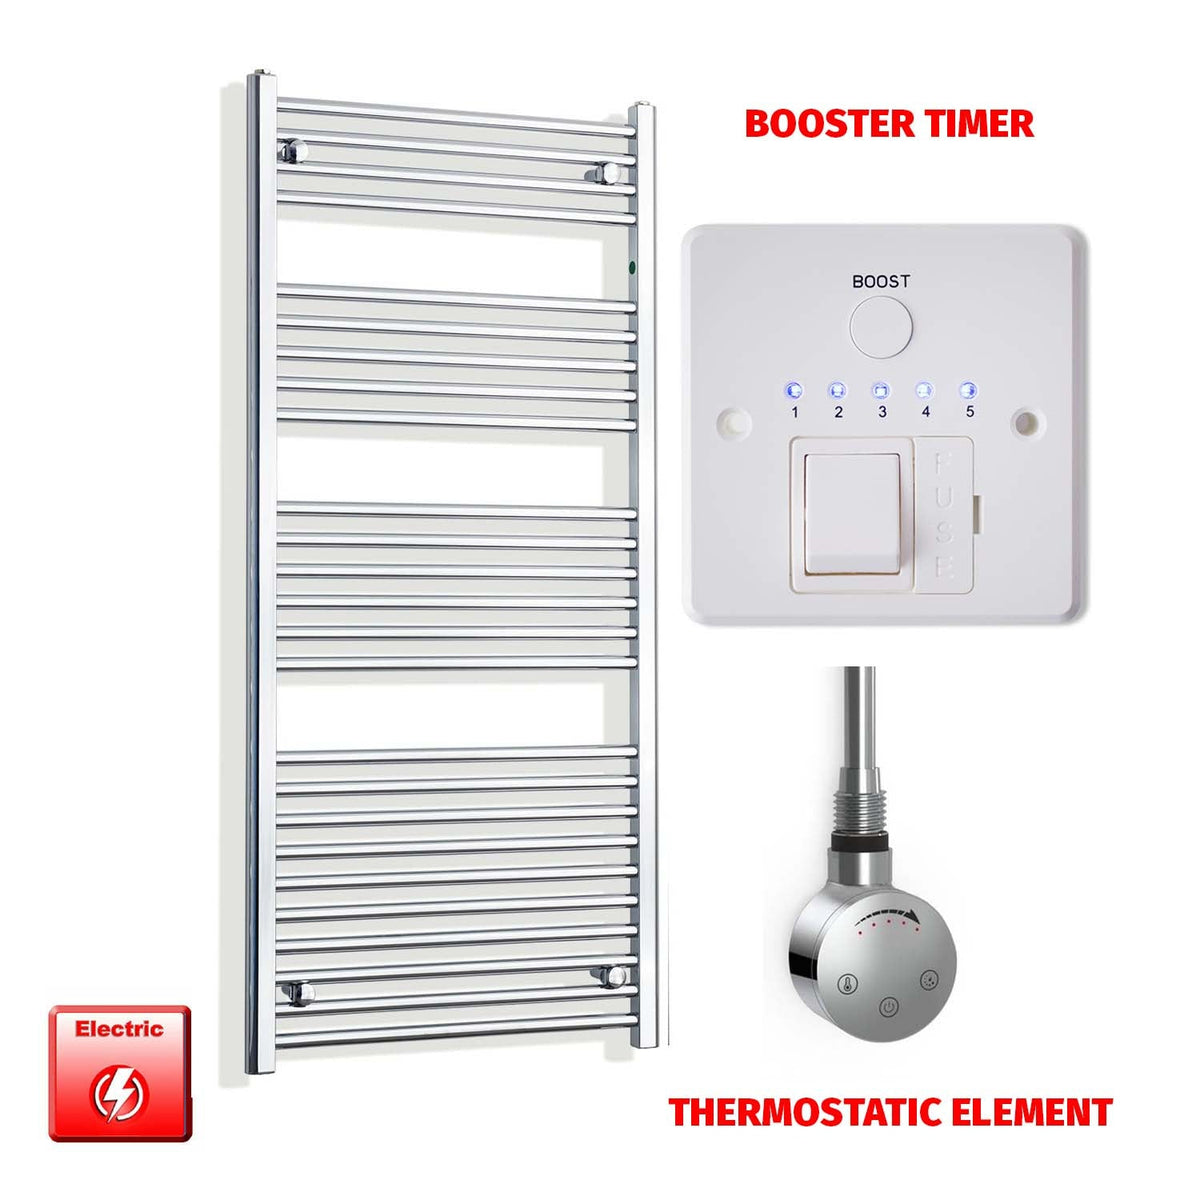 1400mm High 550mm Wide Pre-Filled Electric Heated Towel Radiator Straight Chrome SMR Thermostatic element Booster timer